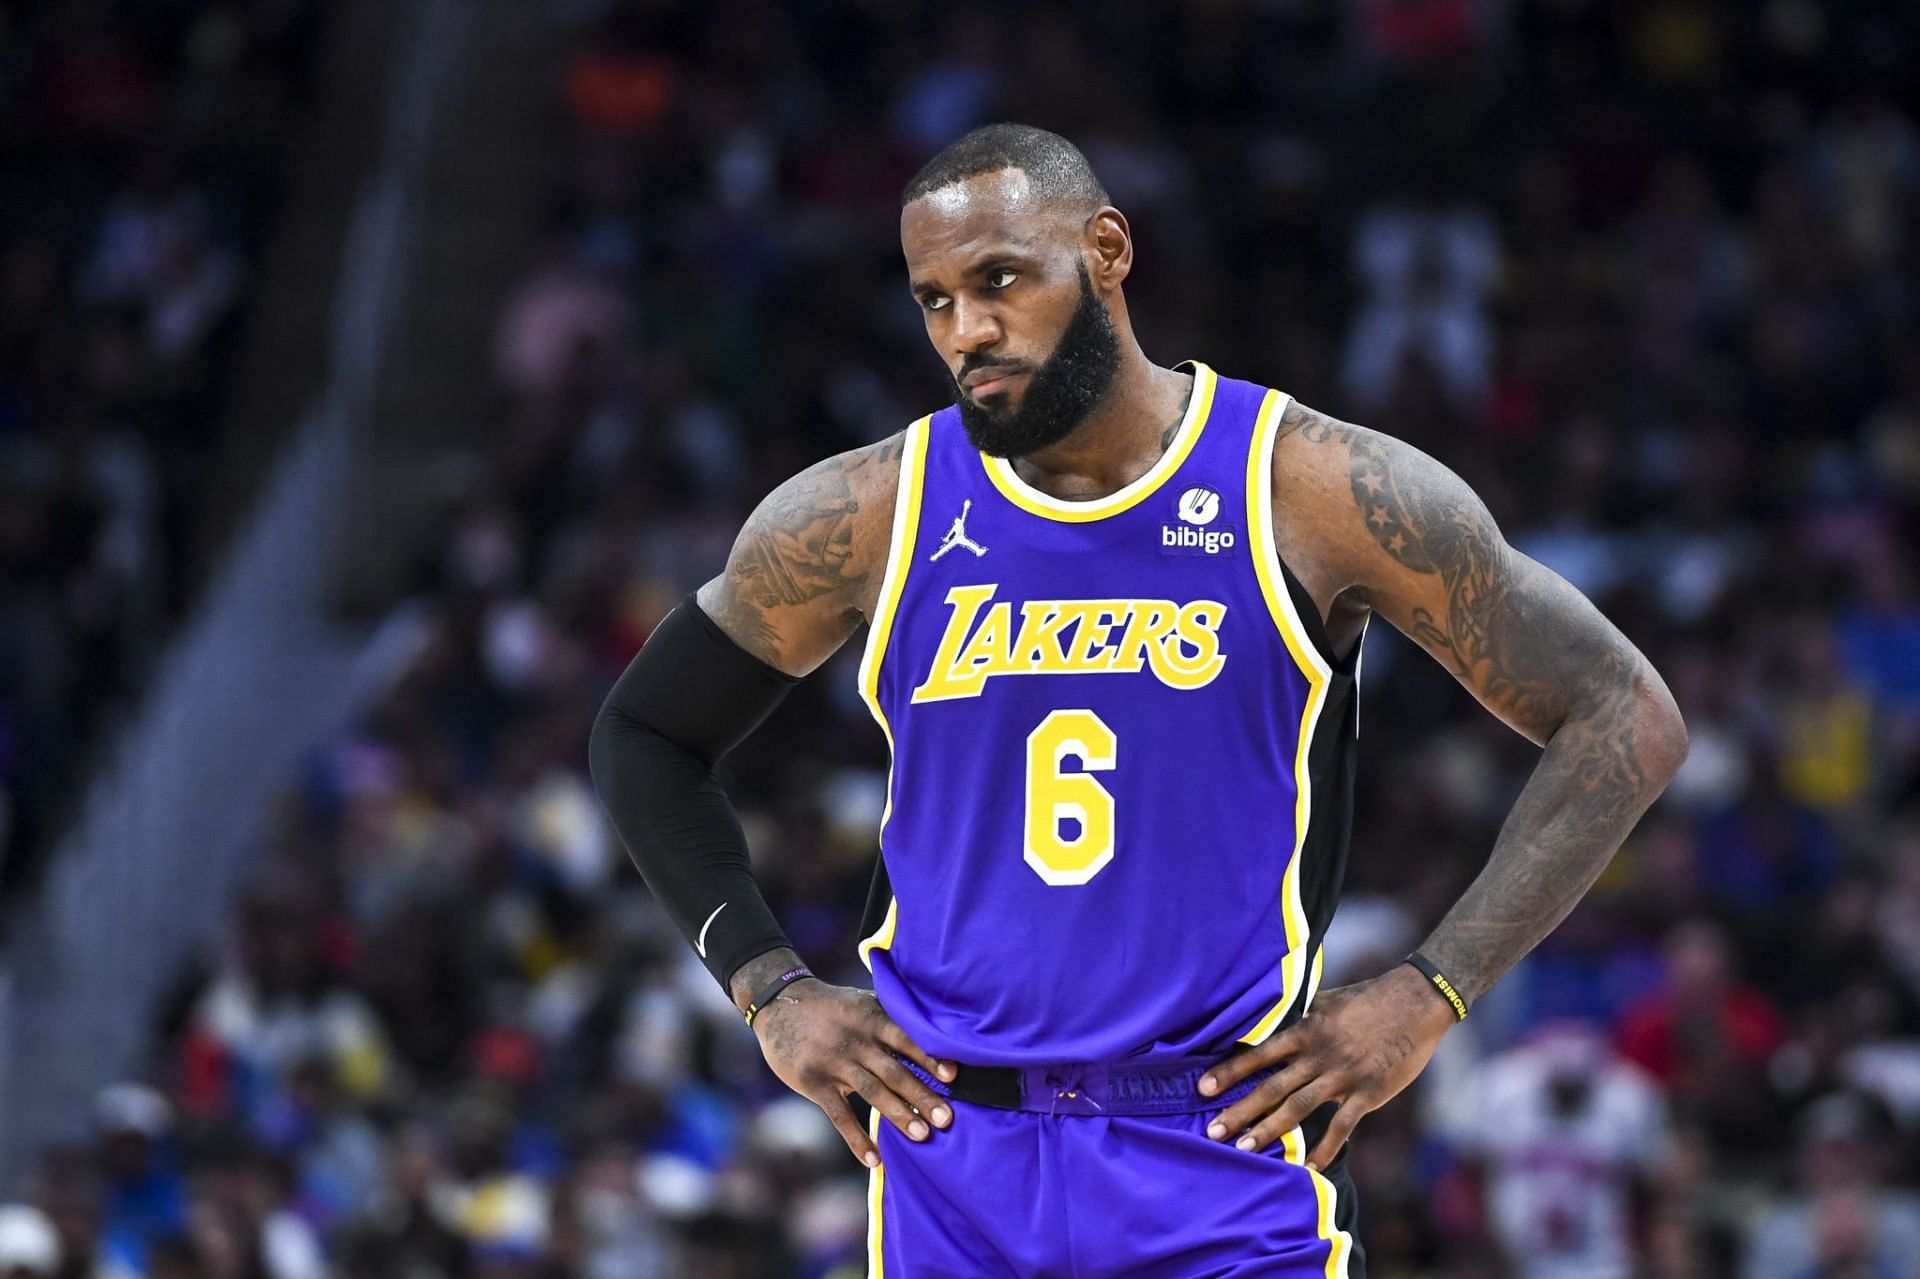 LeBron James may have to cut bait with the LA Lakers to win another title. [The Spun]